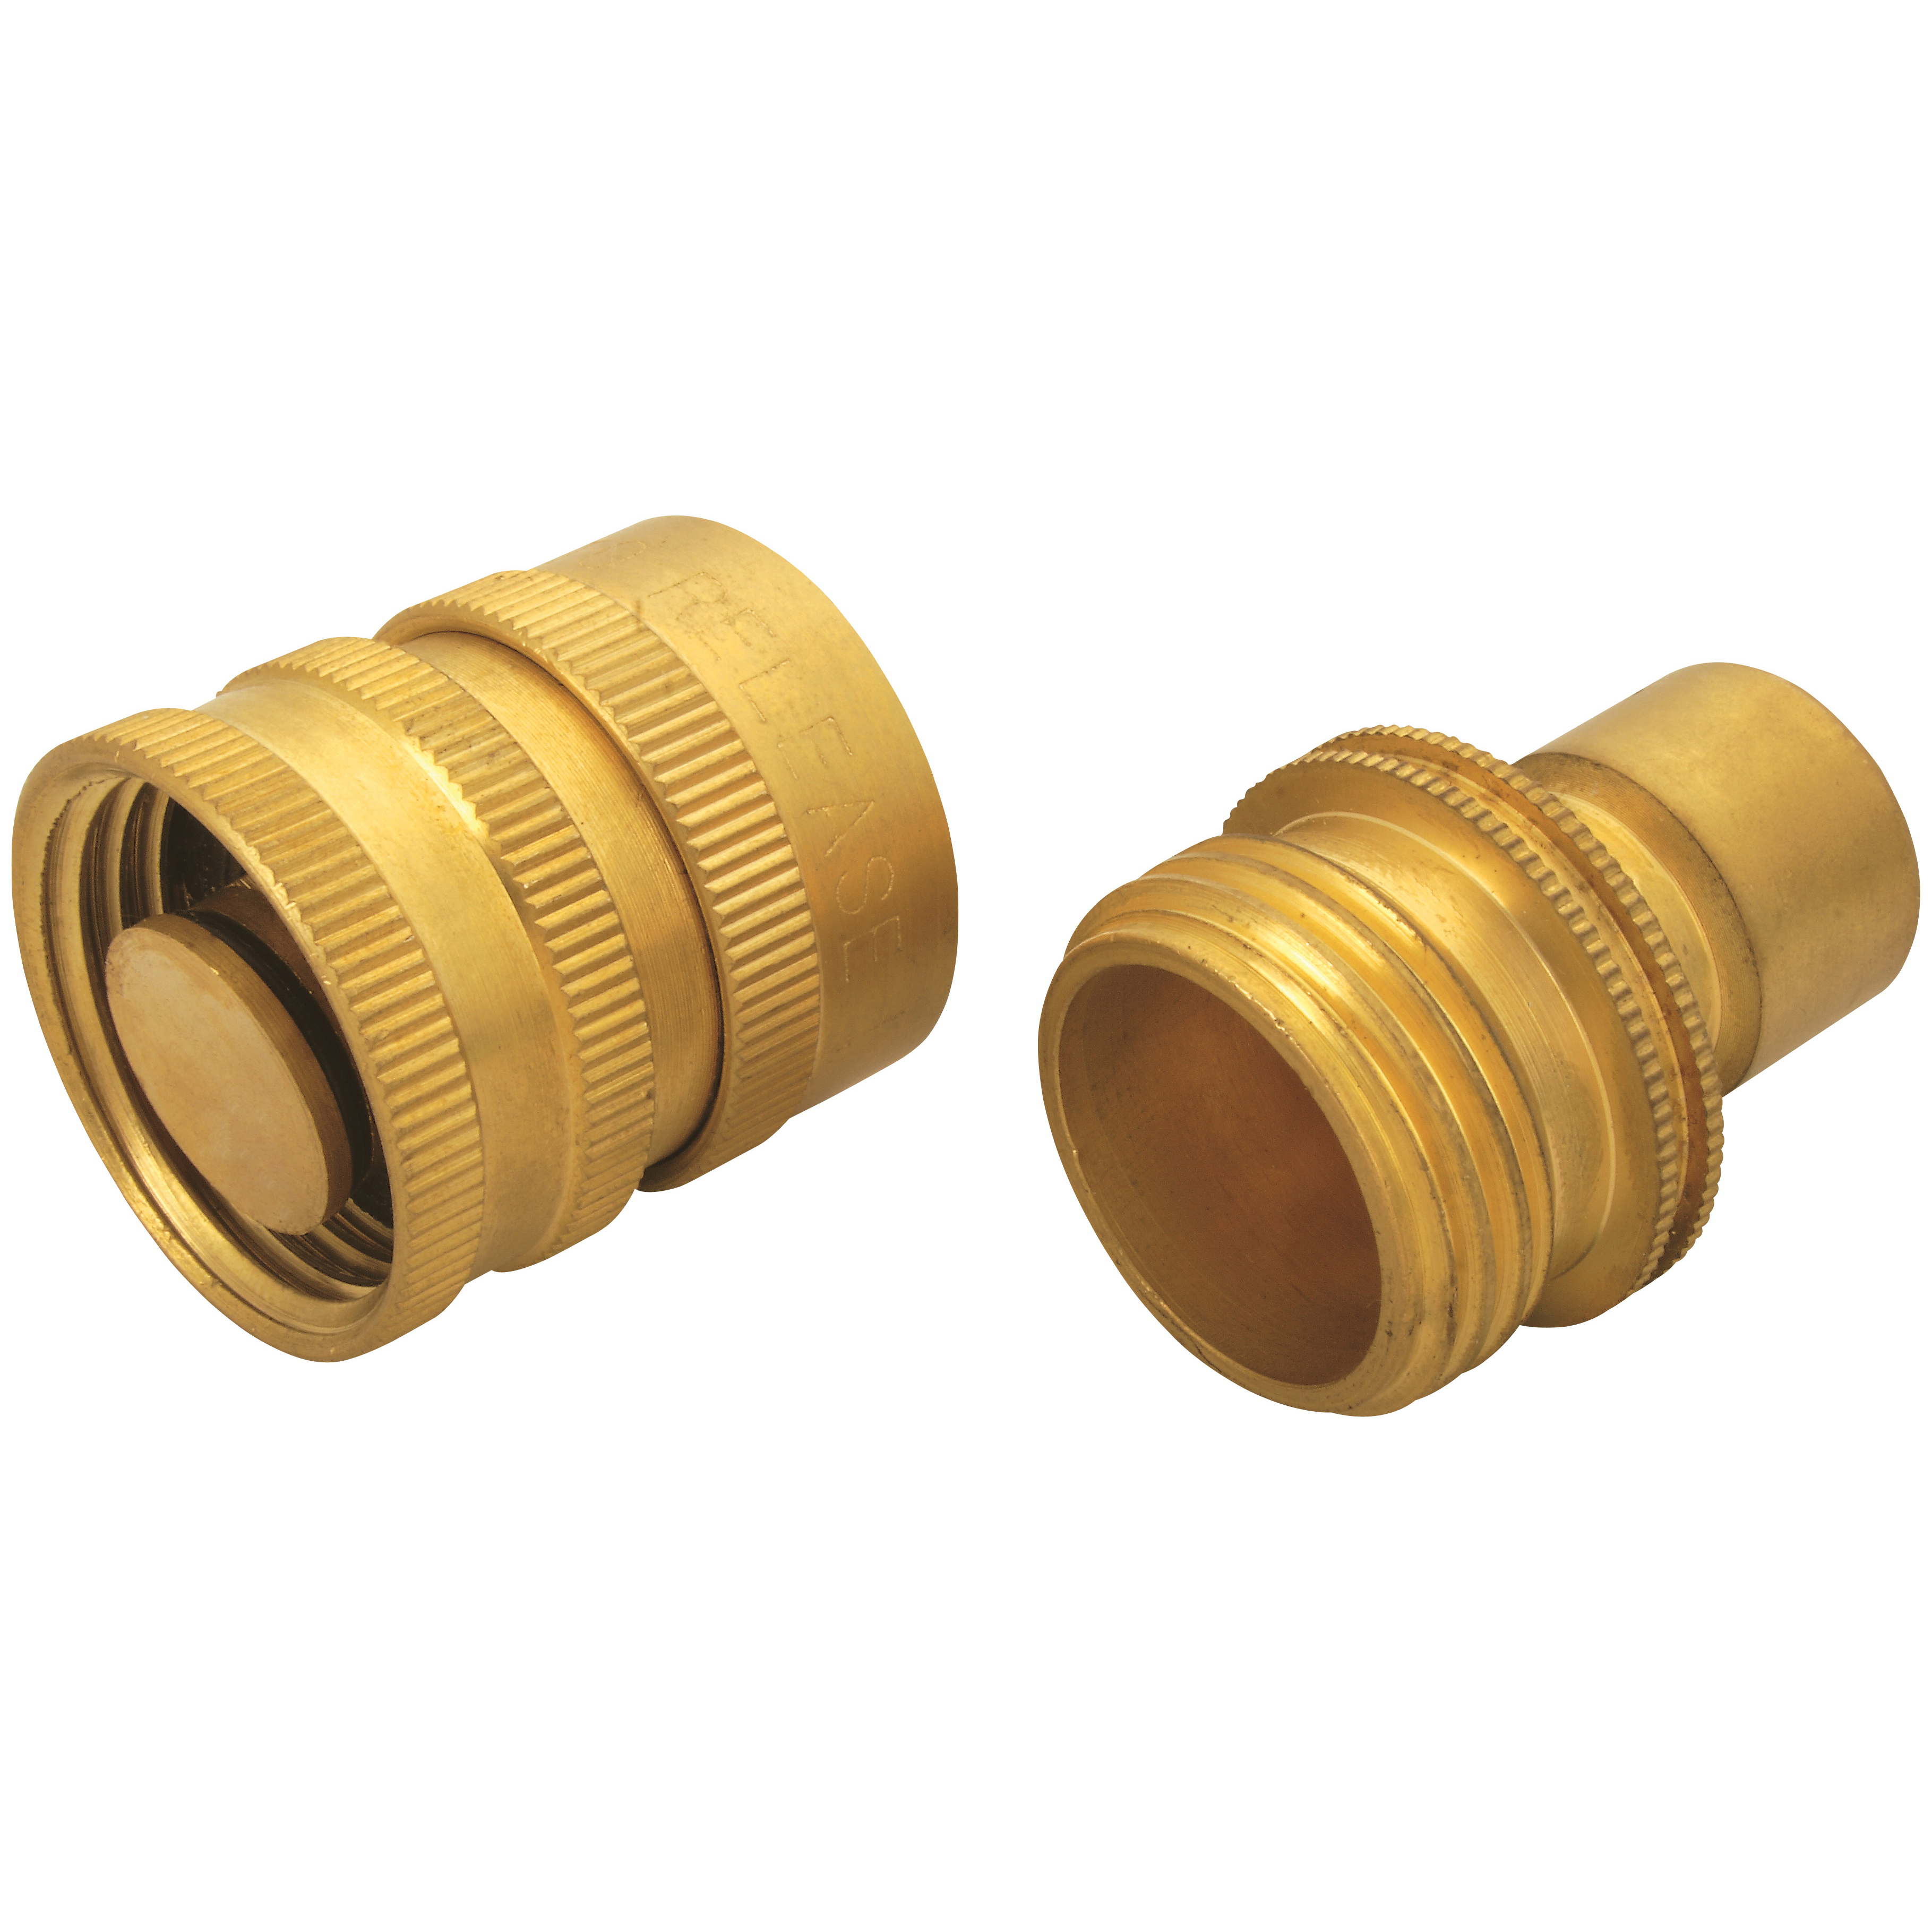 Landscapers Select GB9615 Hose Connector, 3/4 in, Male and Female, Brass, Brass